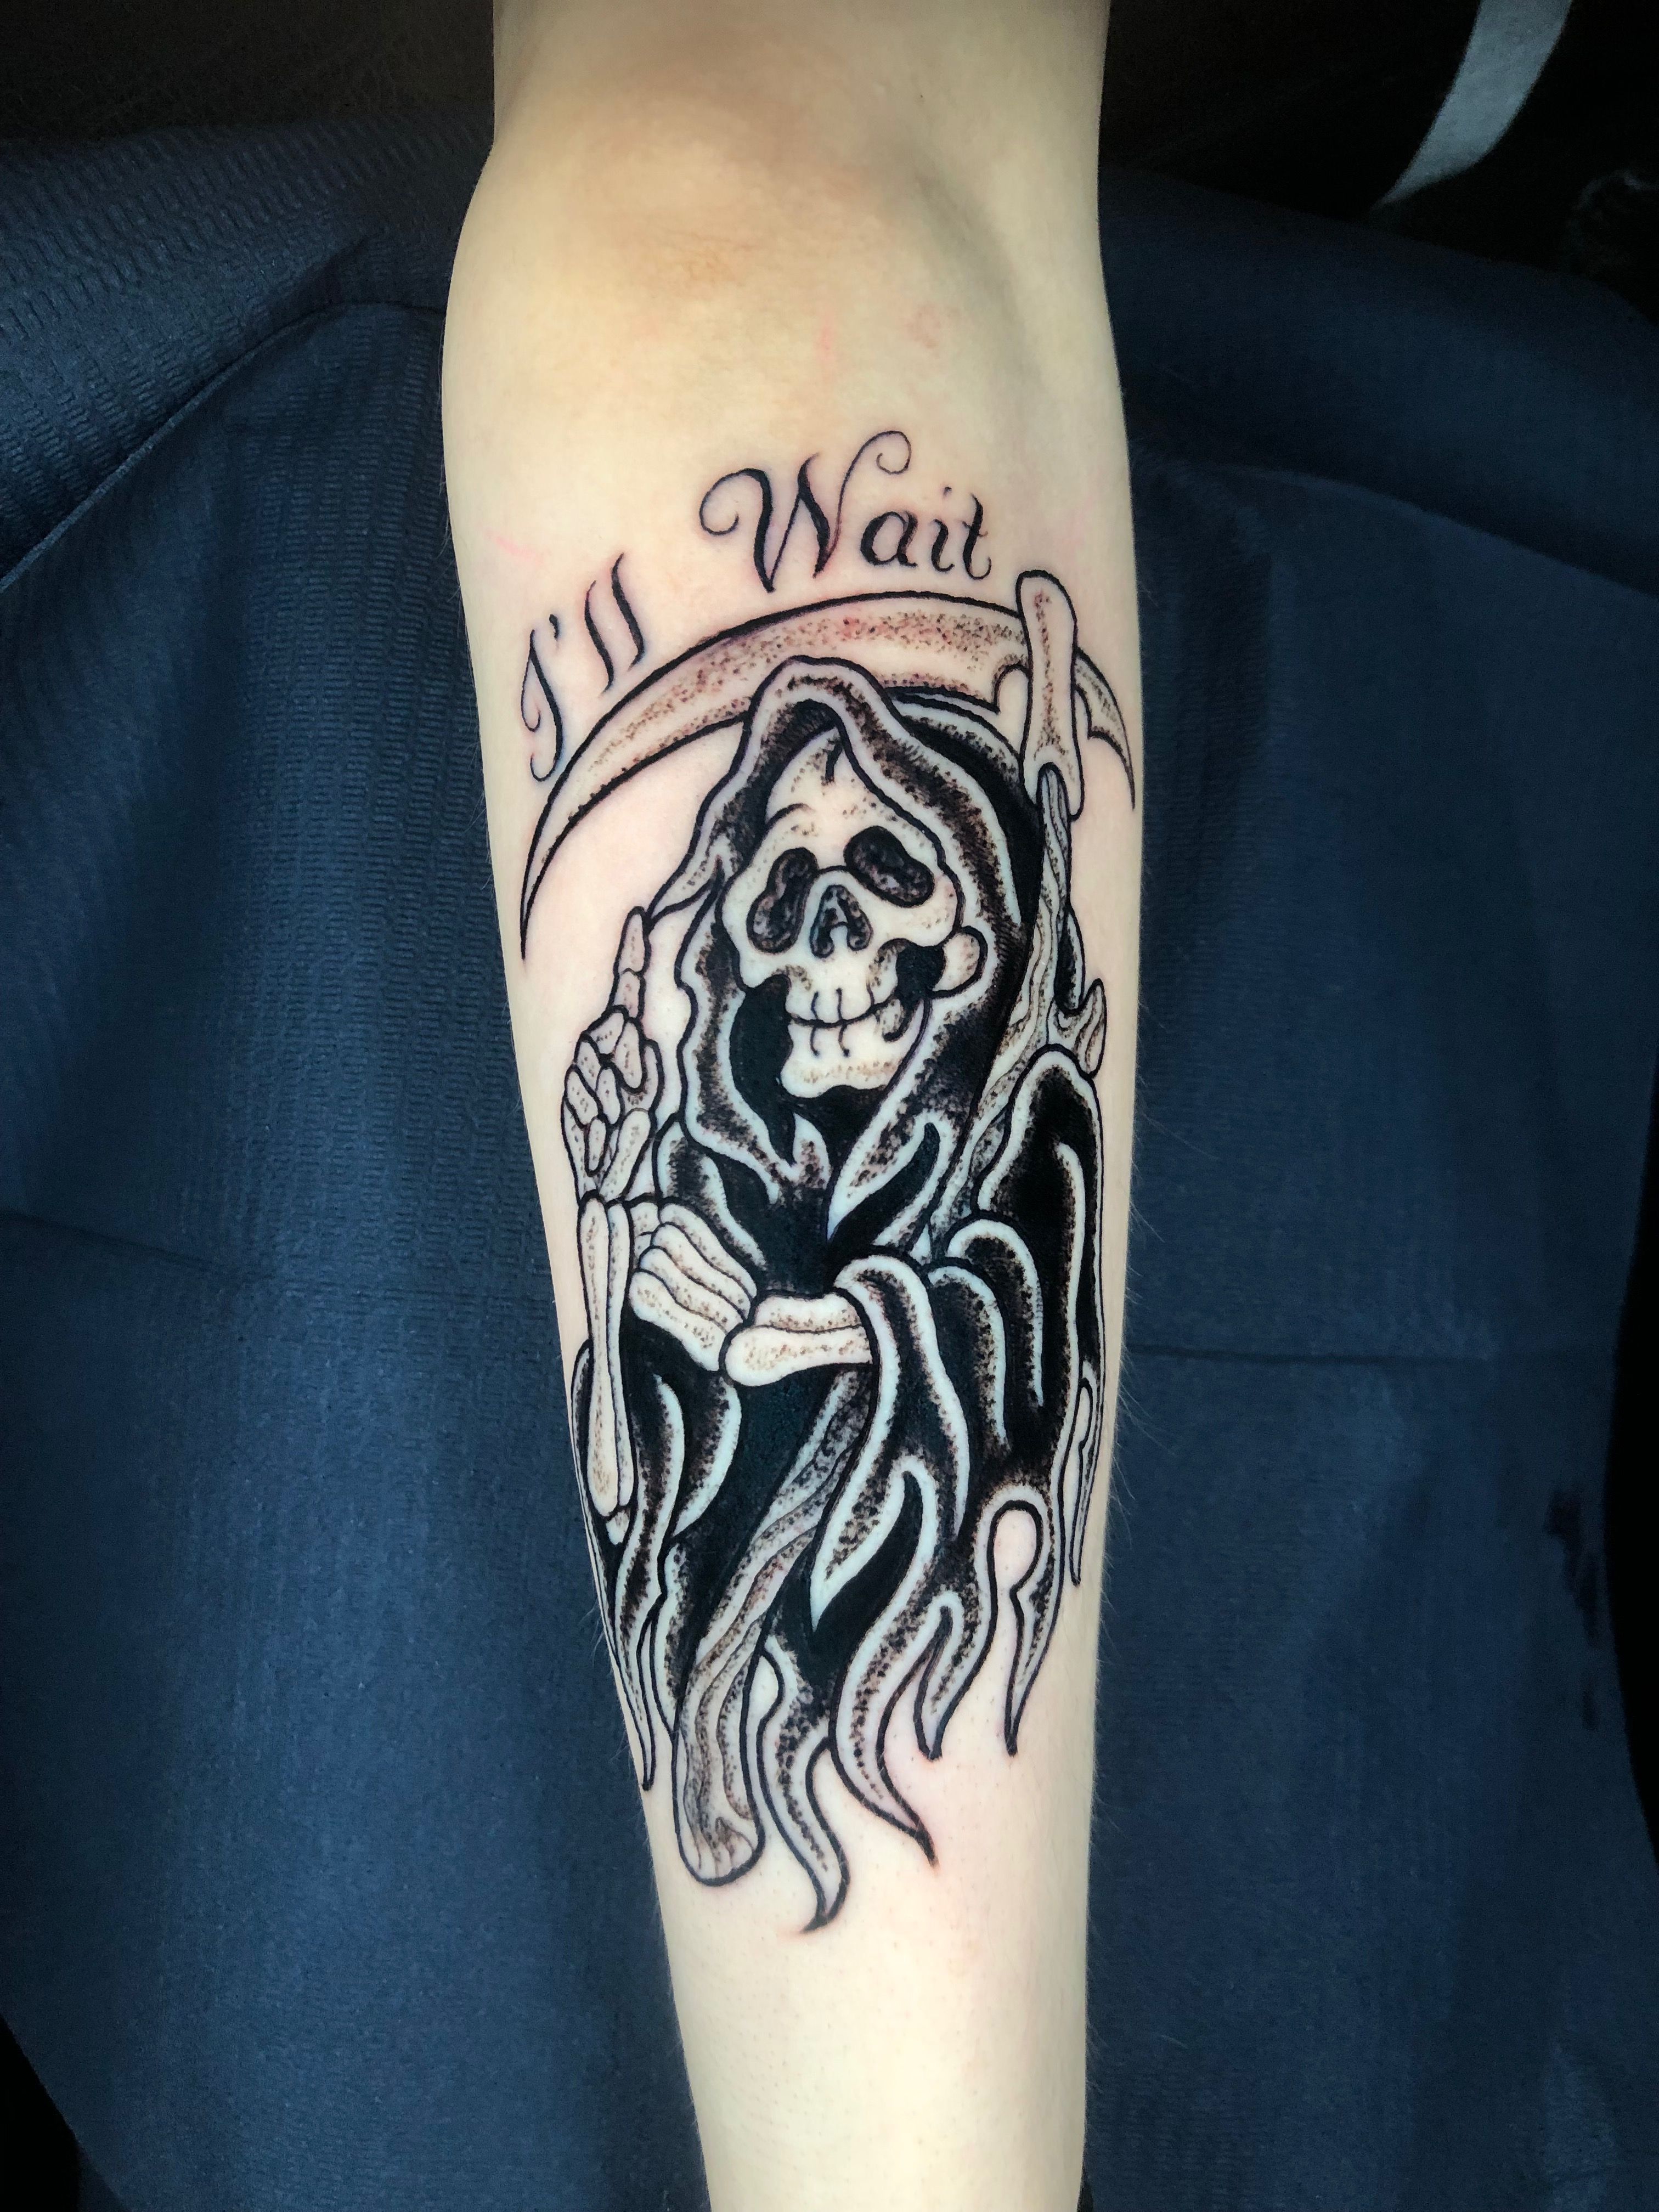 Grim reaper tattoo done by @mr_deadmind ~ 𝑇𝑜 𝑚𝑎𝑘𝑒 𝑎  𝑏𝑜𝑜𝑘𝑖𝑛𝑔／／．DM or email - info@deadmindtattoos.com with size, location of  the piece and… | Instagram